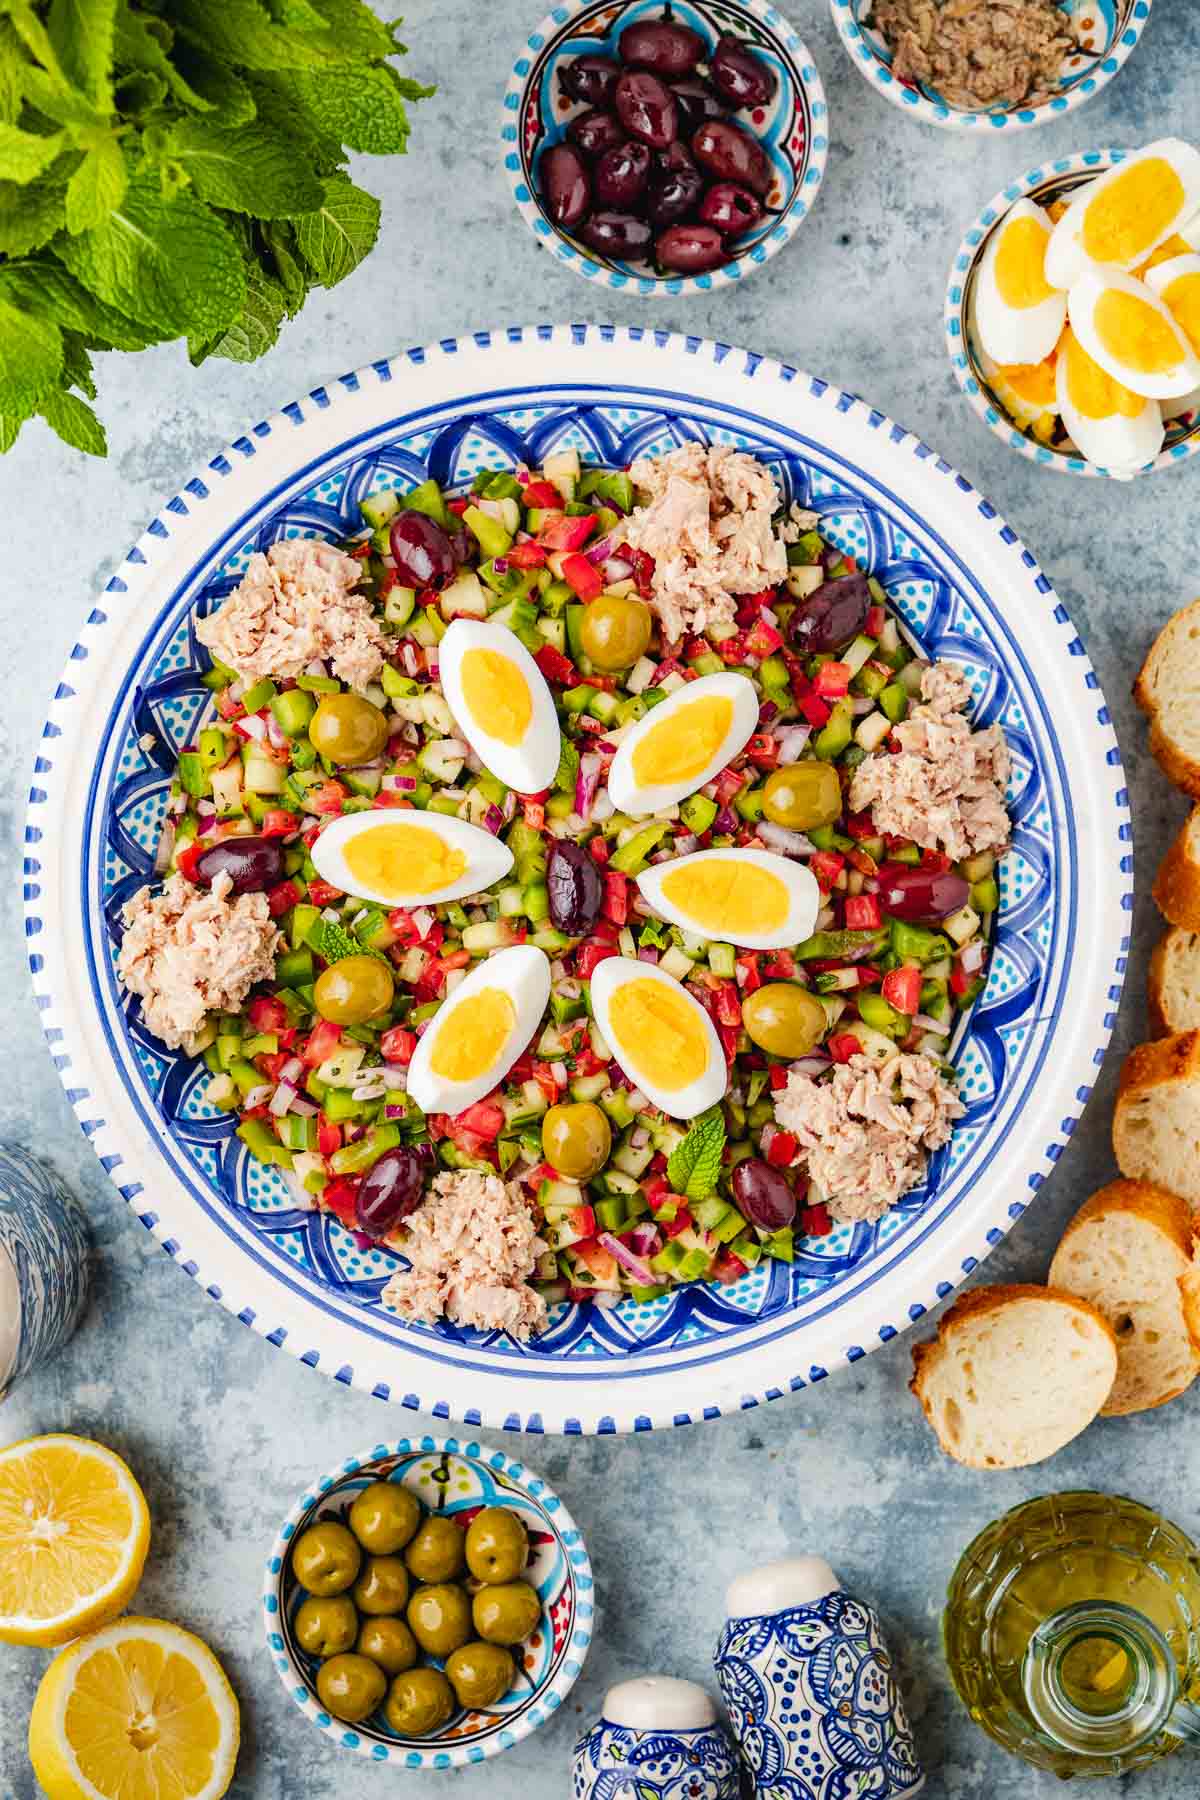 An overhead photo of tunisian salad in a serving bowl, topped with wedges of hard boiled eggs. This is surrounded by mint, slices of crusty bread, lemon halves, salt, pepper, olive oil and bowls of green olive, kalamata olives, tuna, and more hard boiled egg wedges.